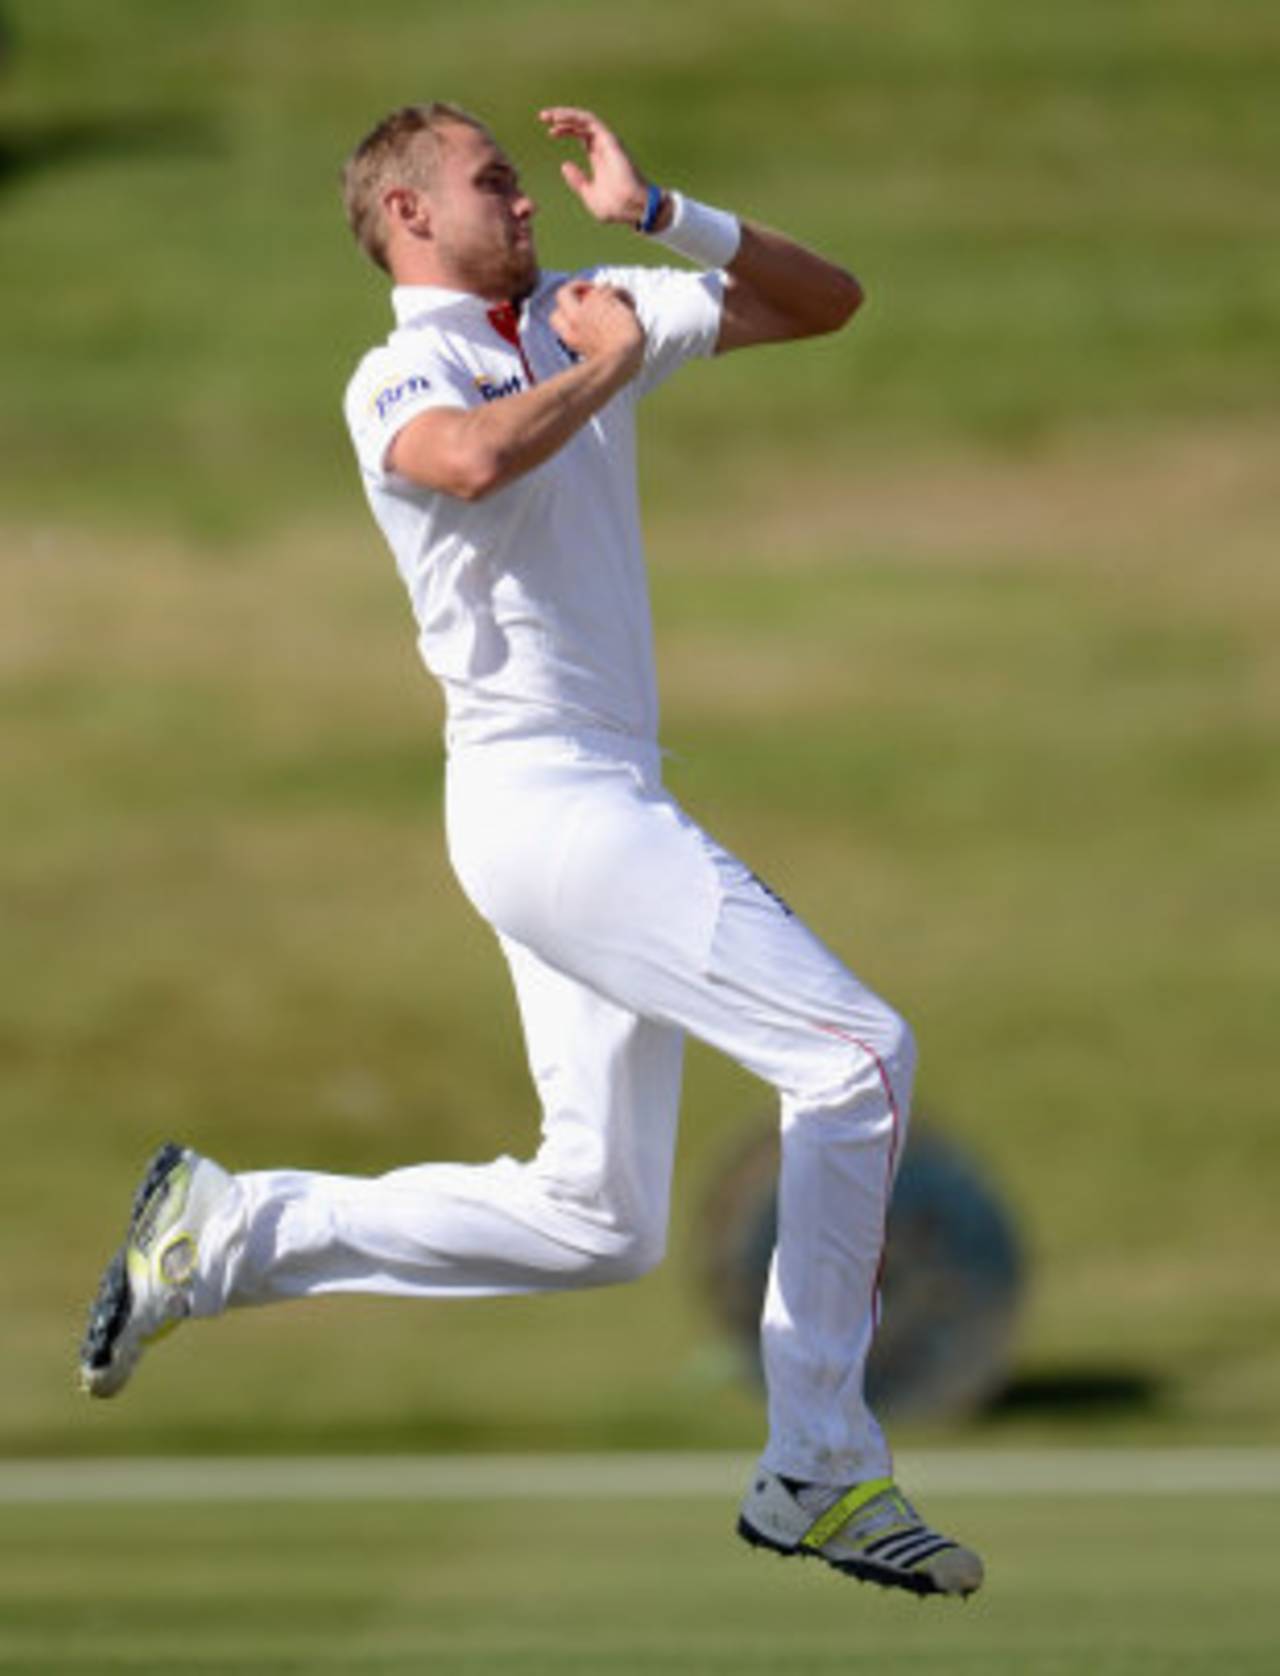 Stuart Broad expressed satisfaction with his fitness as he prepared for the first Test against New Zealand in Dunedin next week&nbsp;&nbsp;&bull;&nbsp;&nbsp;Getty Images